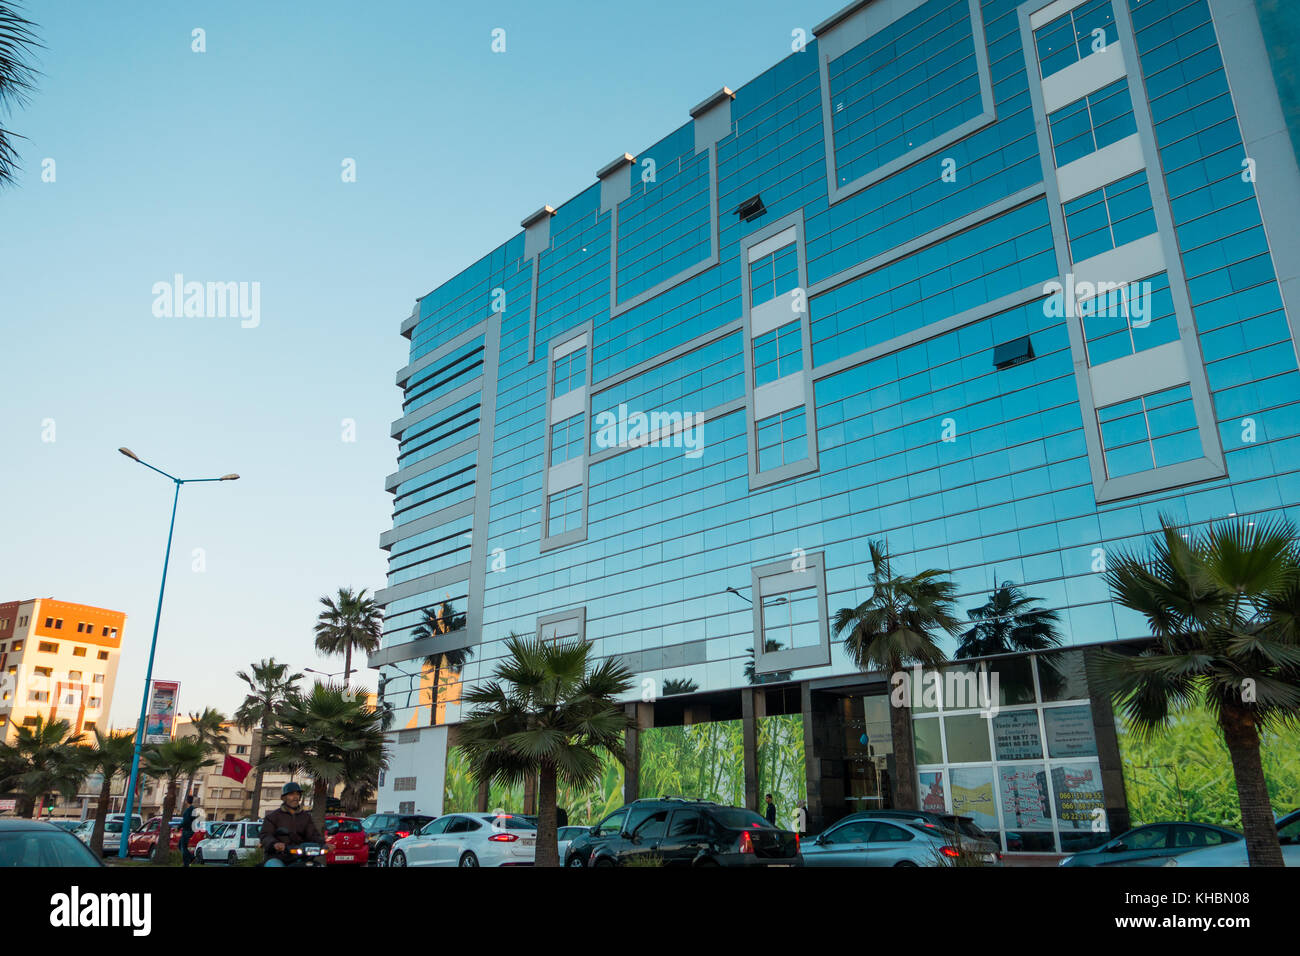 Casablanca, Morocco - November 7, 2017 : Low angle view of a modern shiny building and cars Stock Photo